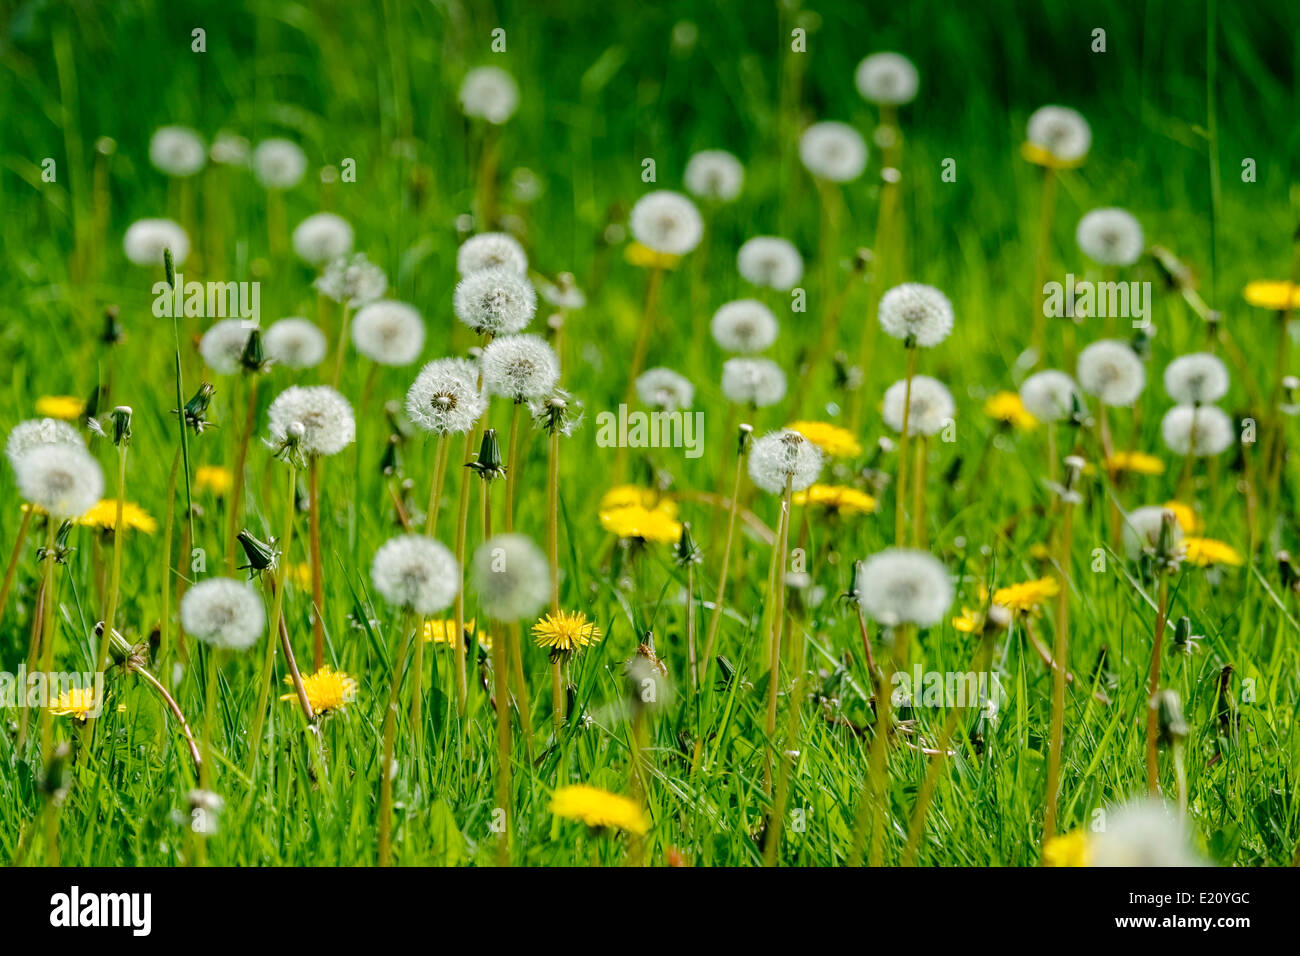 Patch of dandelions, some with blooms and some with seed heads, in a grassy English field in daylight; landscape orientation. Stock Photo